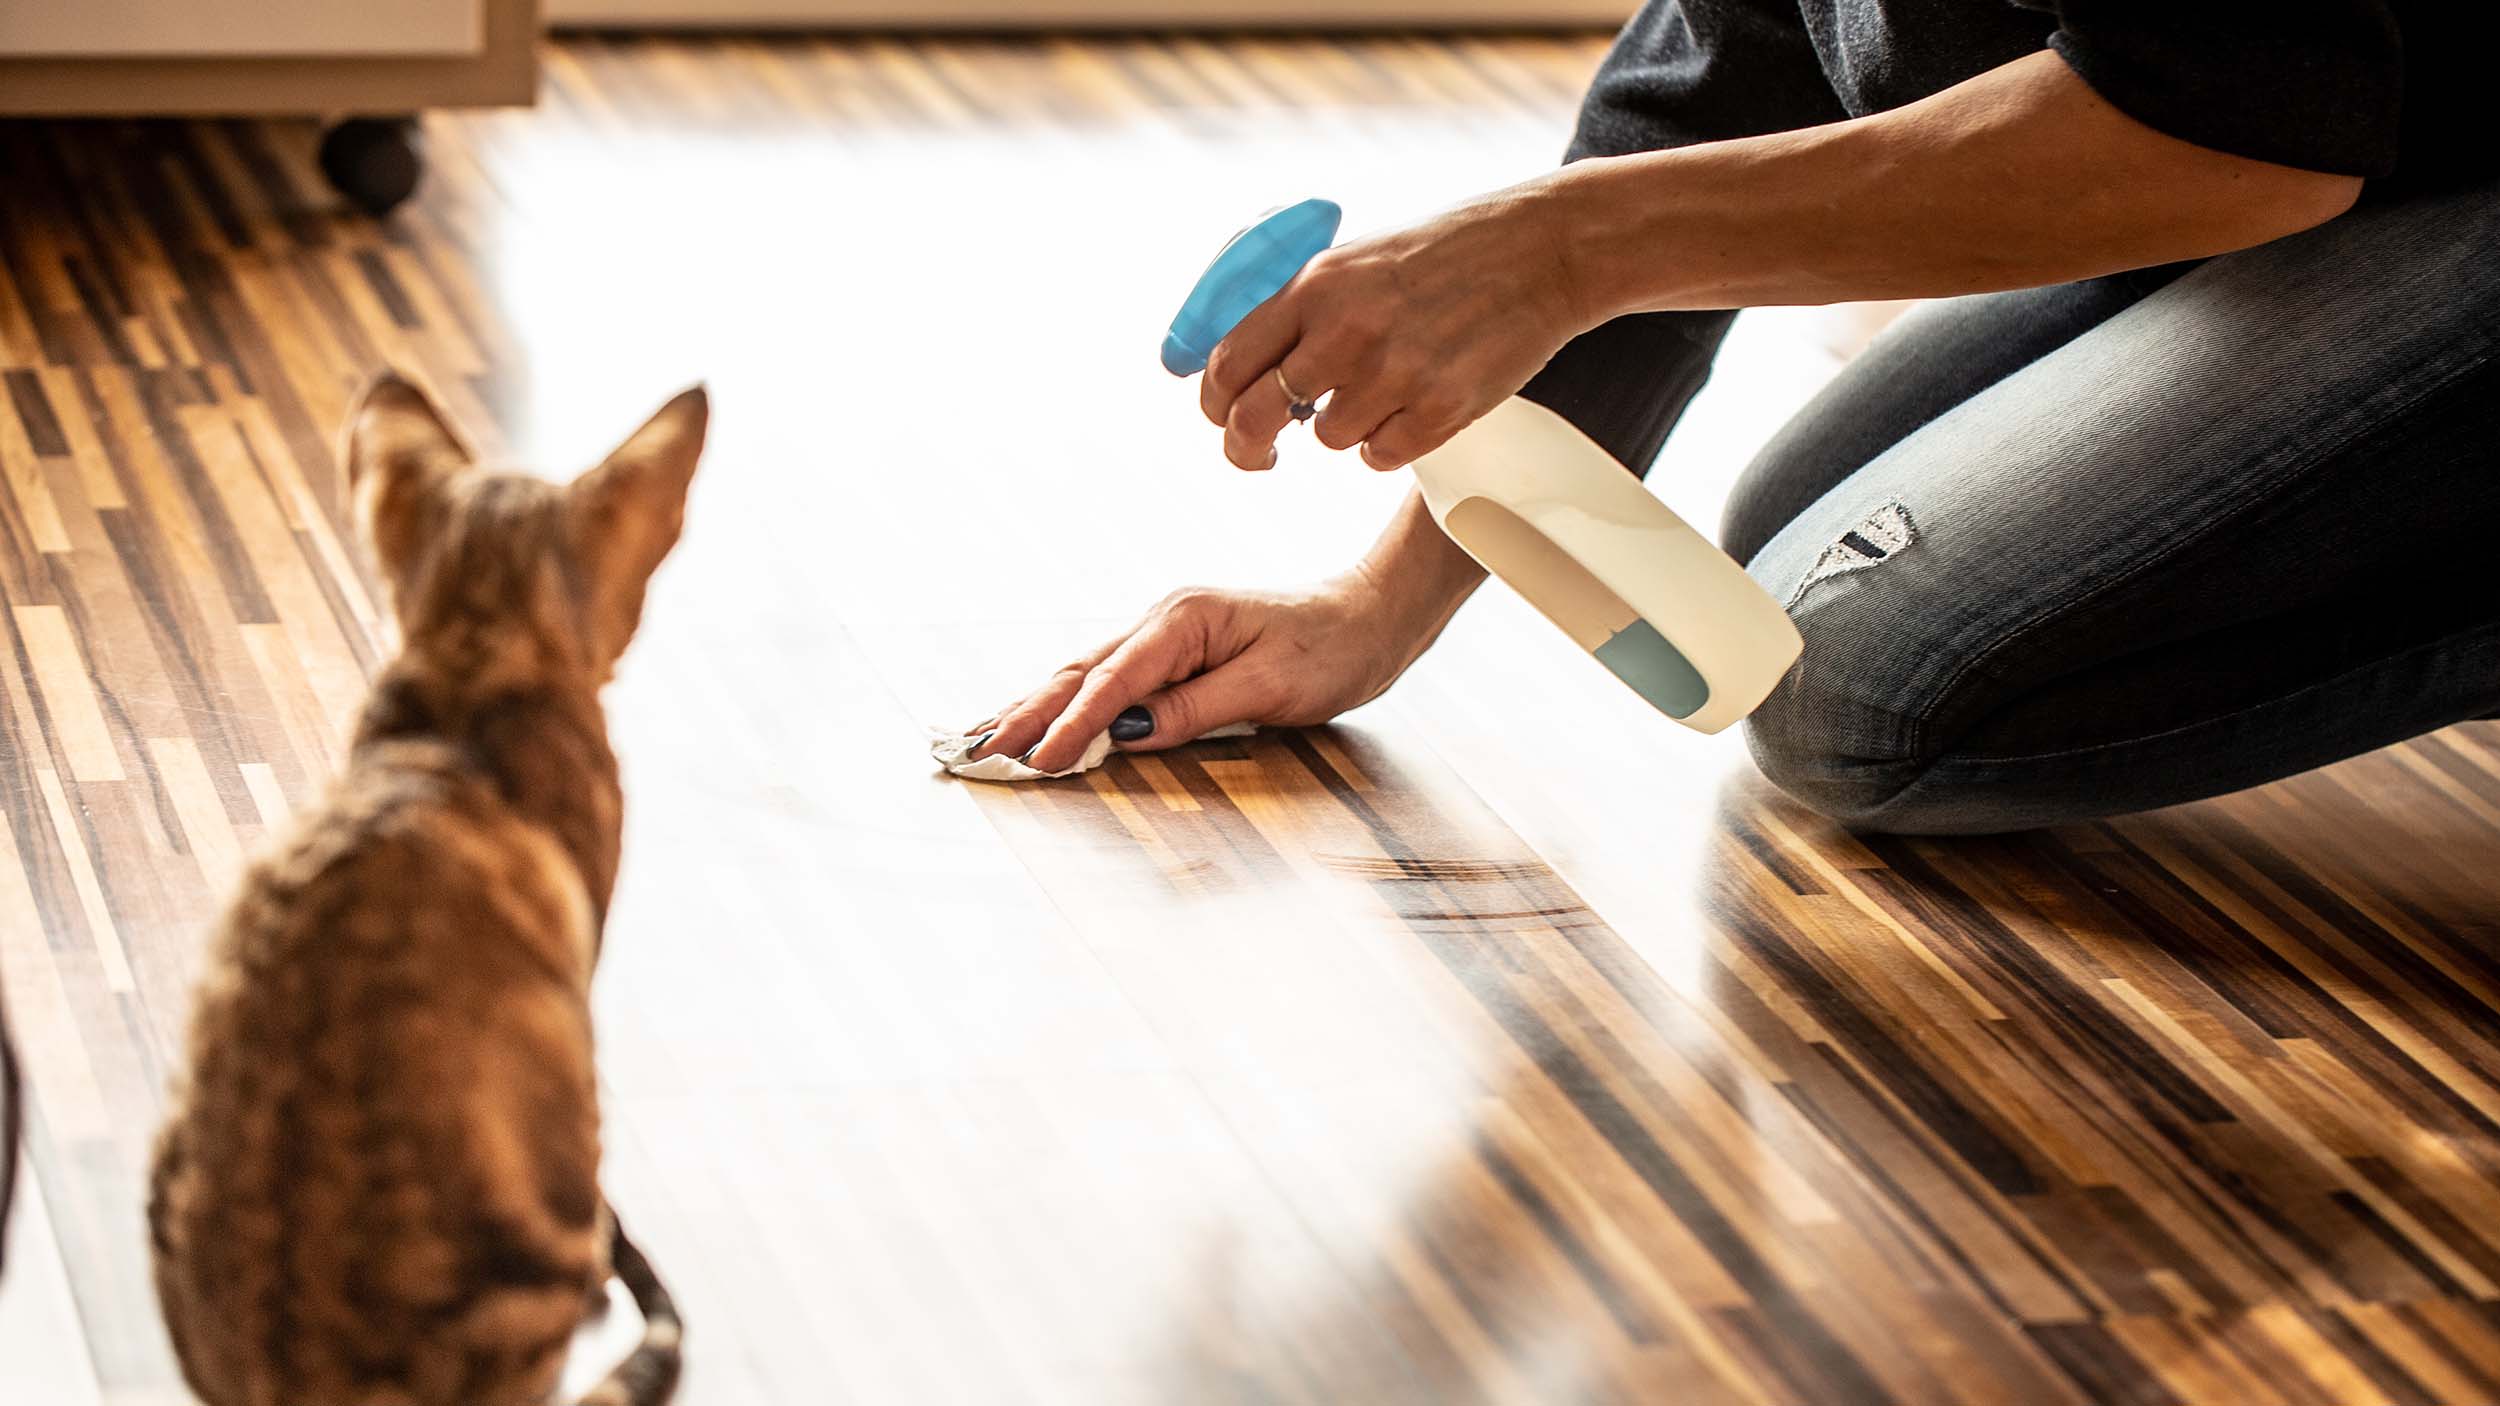 20 products that can clean up every pet mess imaginable, according to experts | CNN Underscored